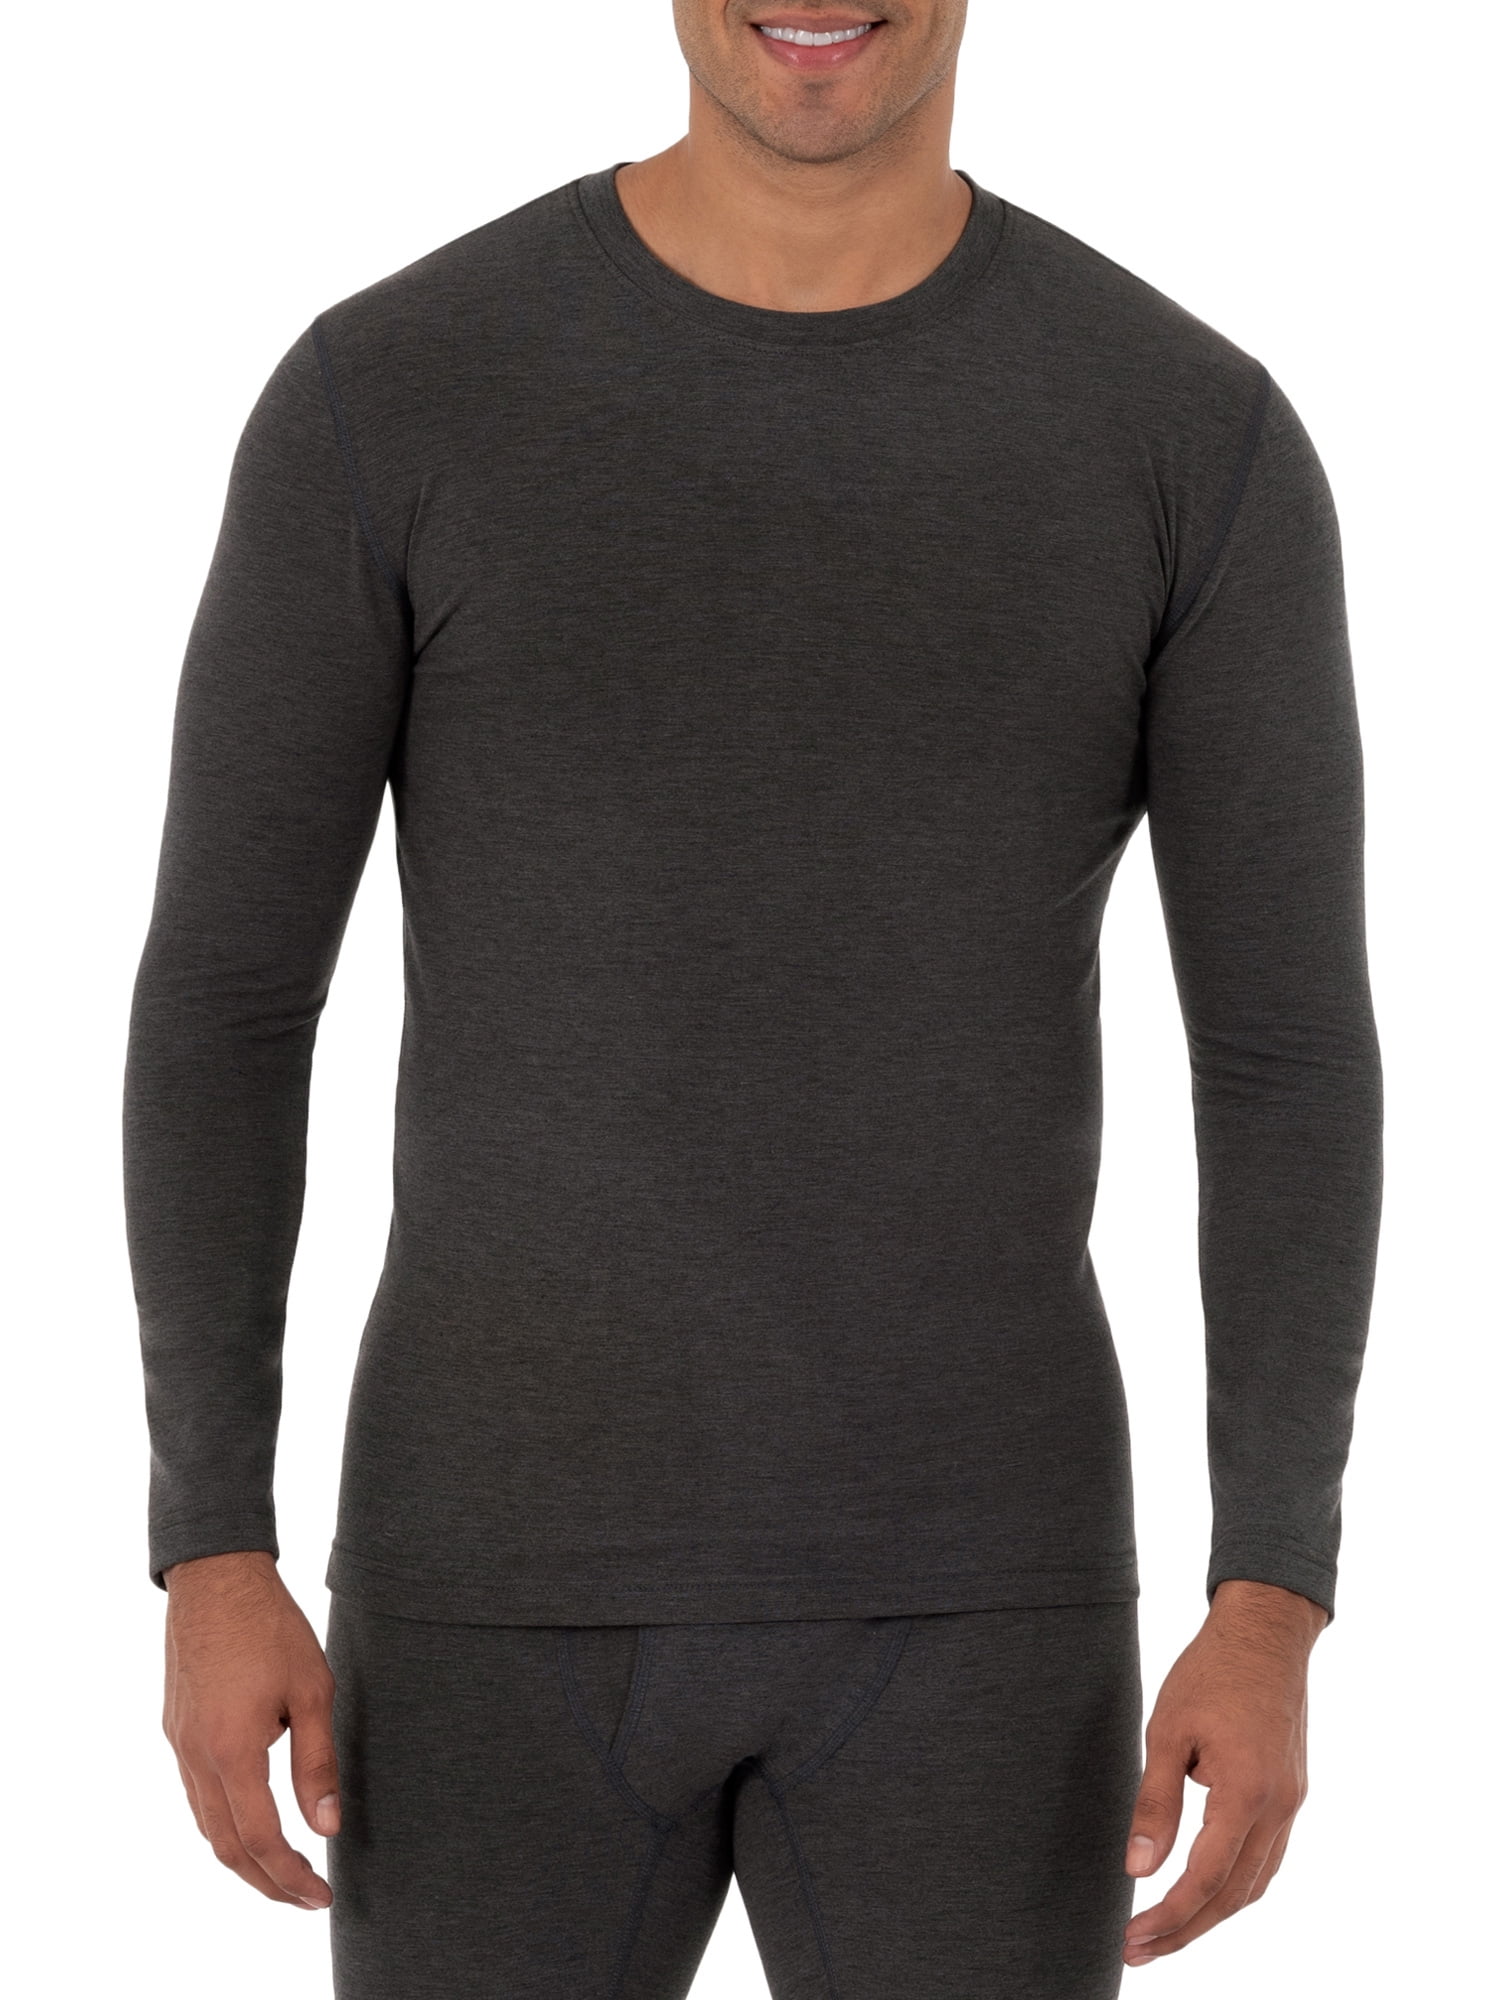 Russell Men's & Big Men's Soft Tech French Terry Thermal Top, Sizes M ...